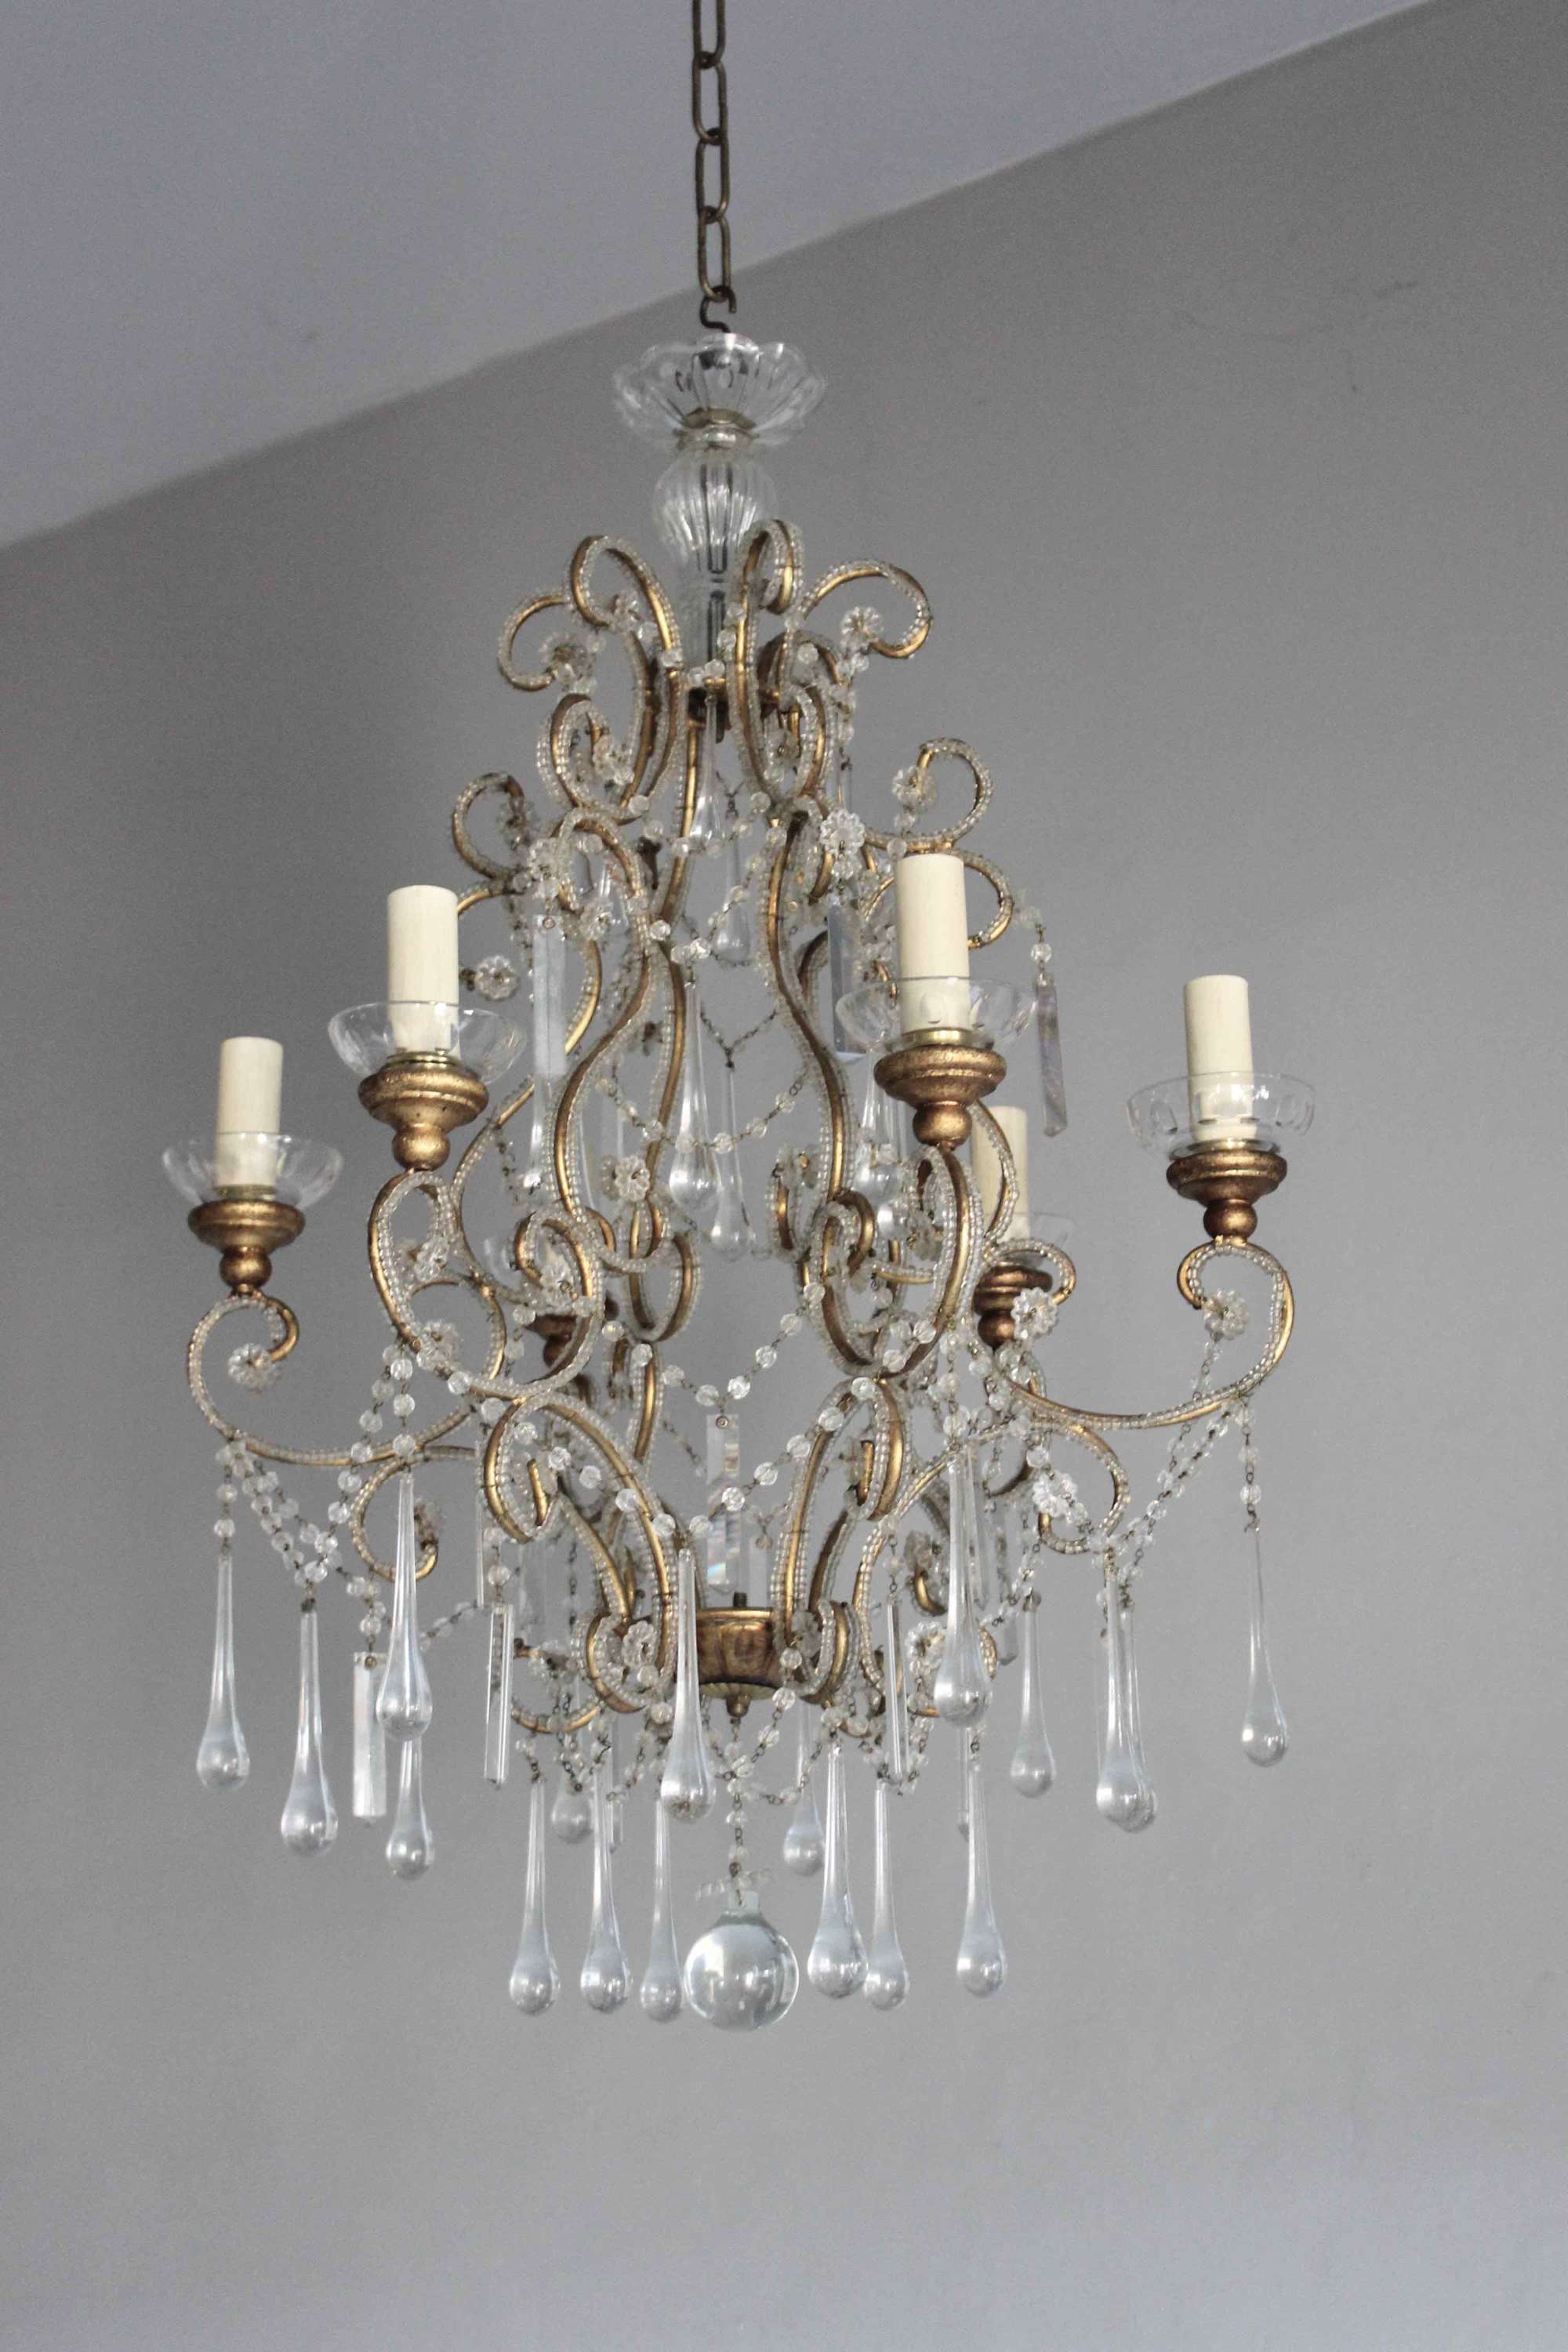 Beaded giltwood and clear glass antique chandelier